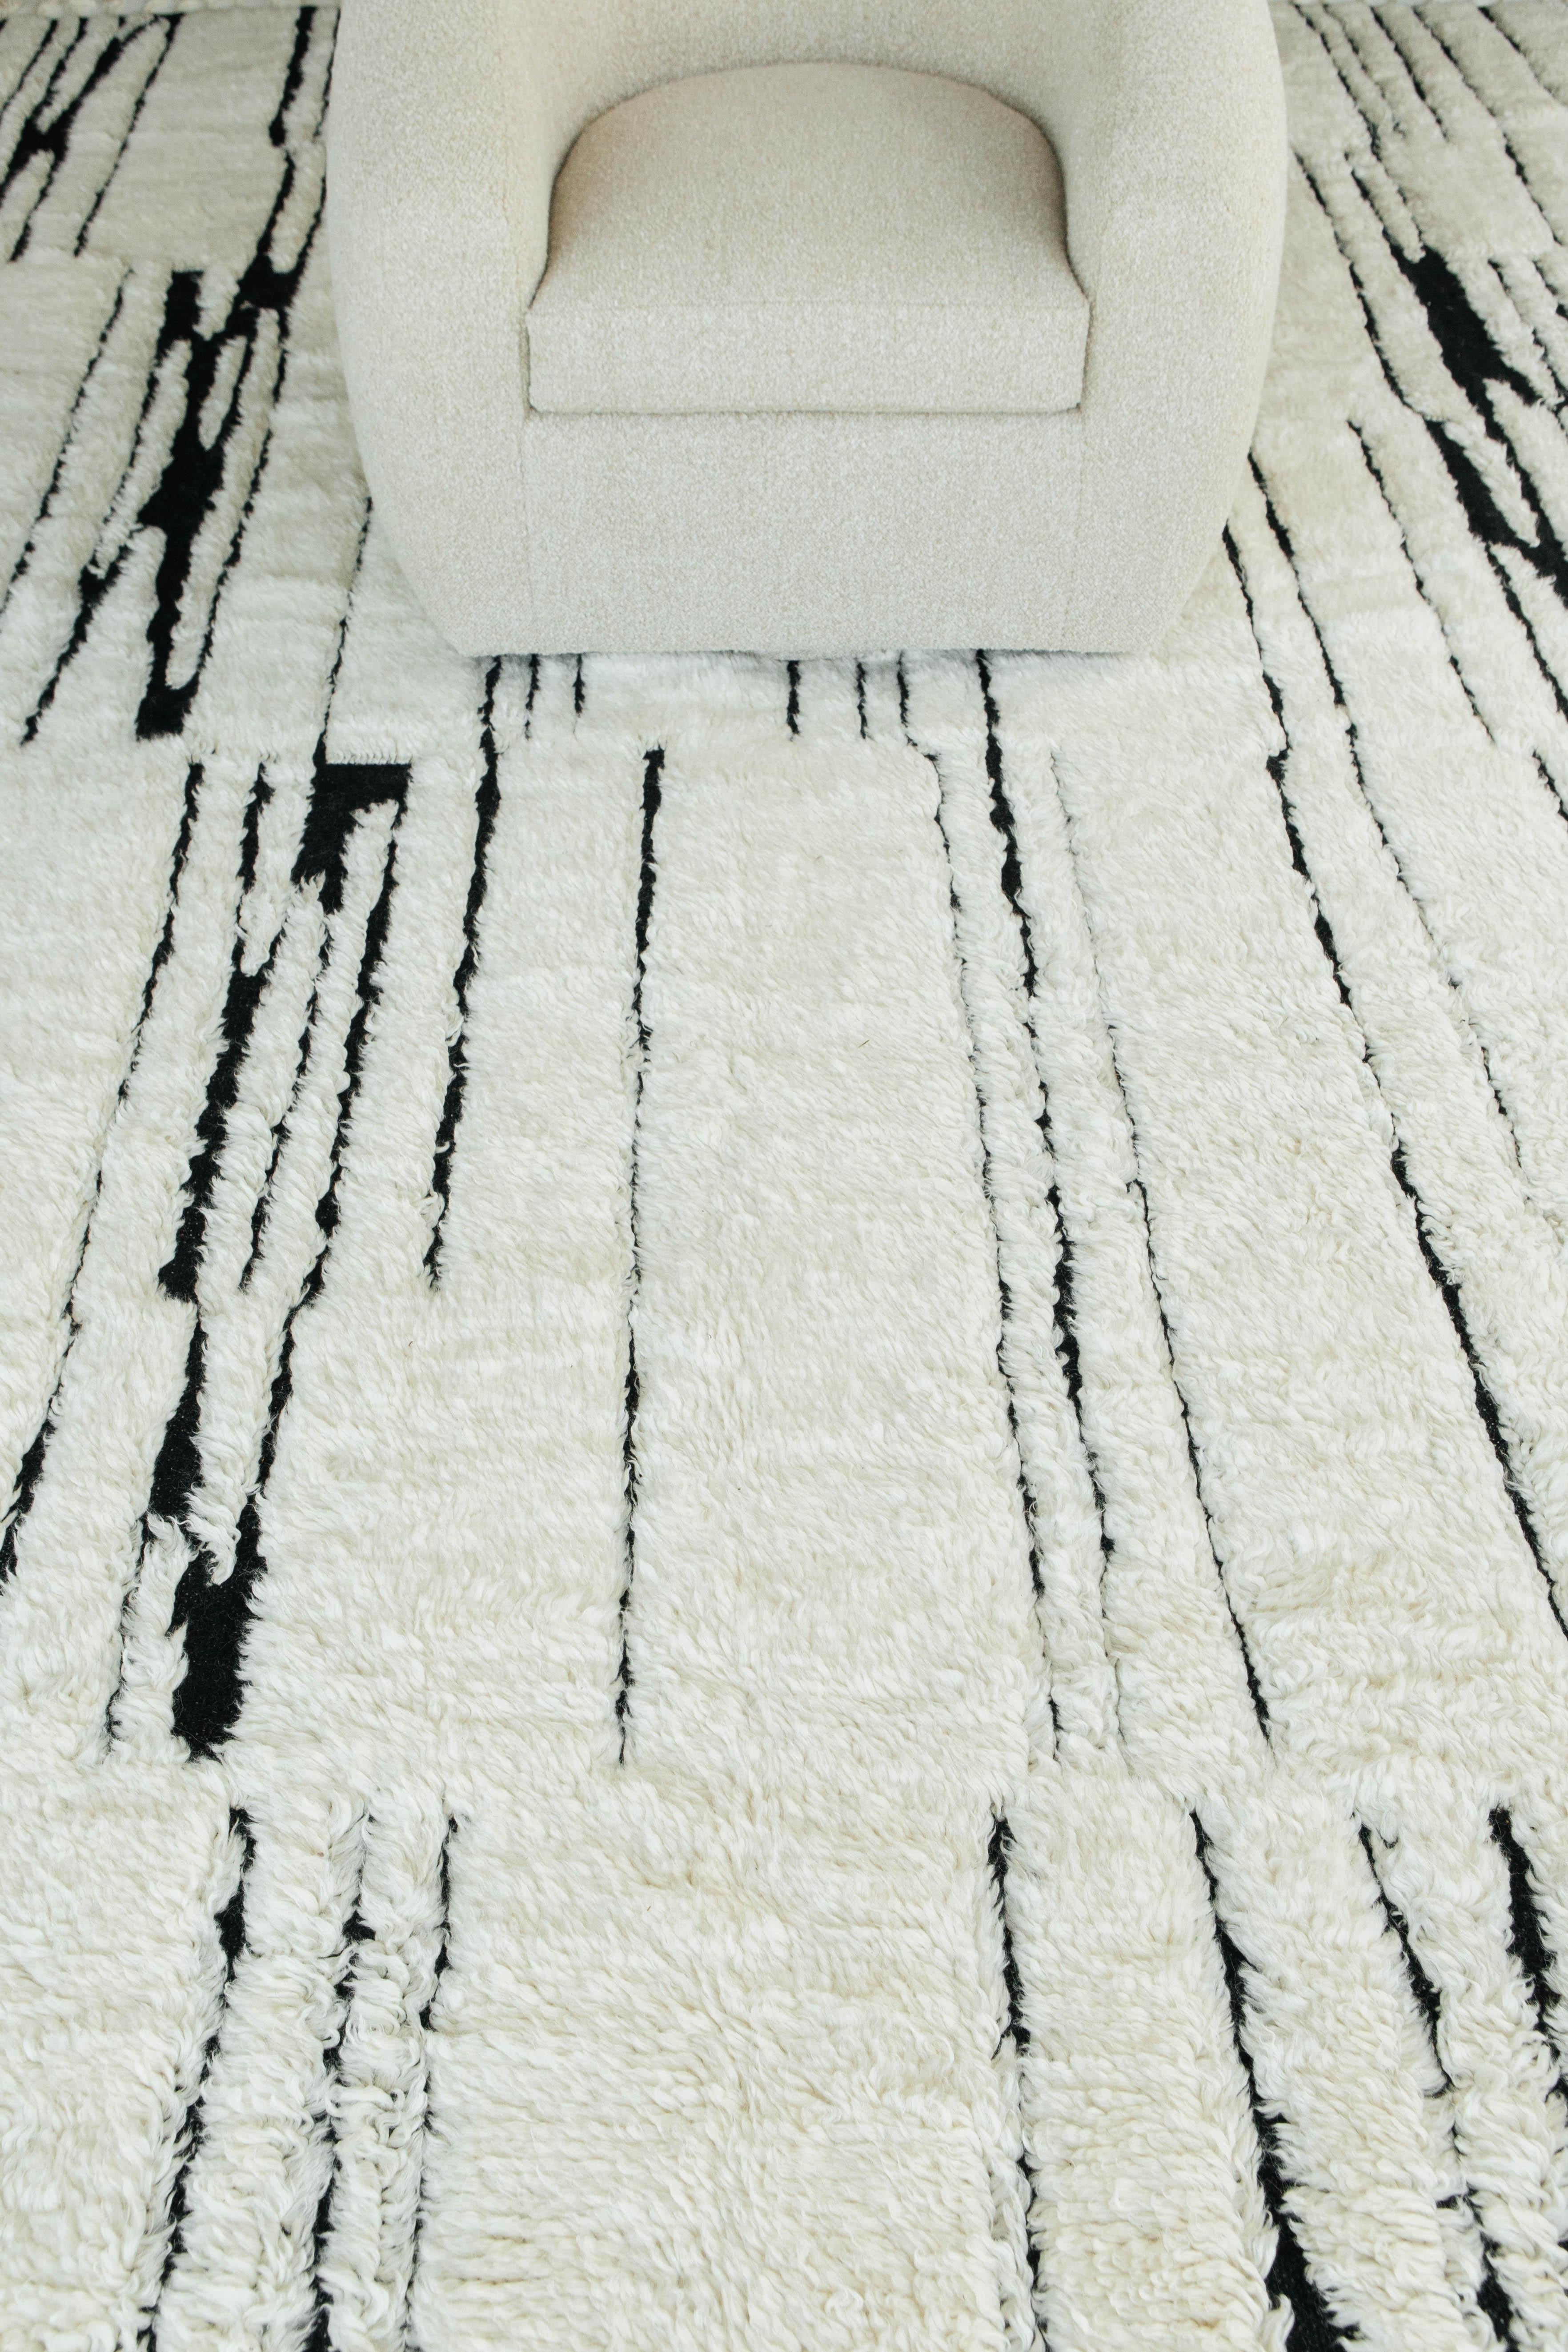 'Notes' is an elegant wool and silk handwoven rug. It is a part of the Design Rhymes collection which pulls inspiration from different aspects of architecture. Don't let this black and white design fool you with simplicity, it has personality that